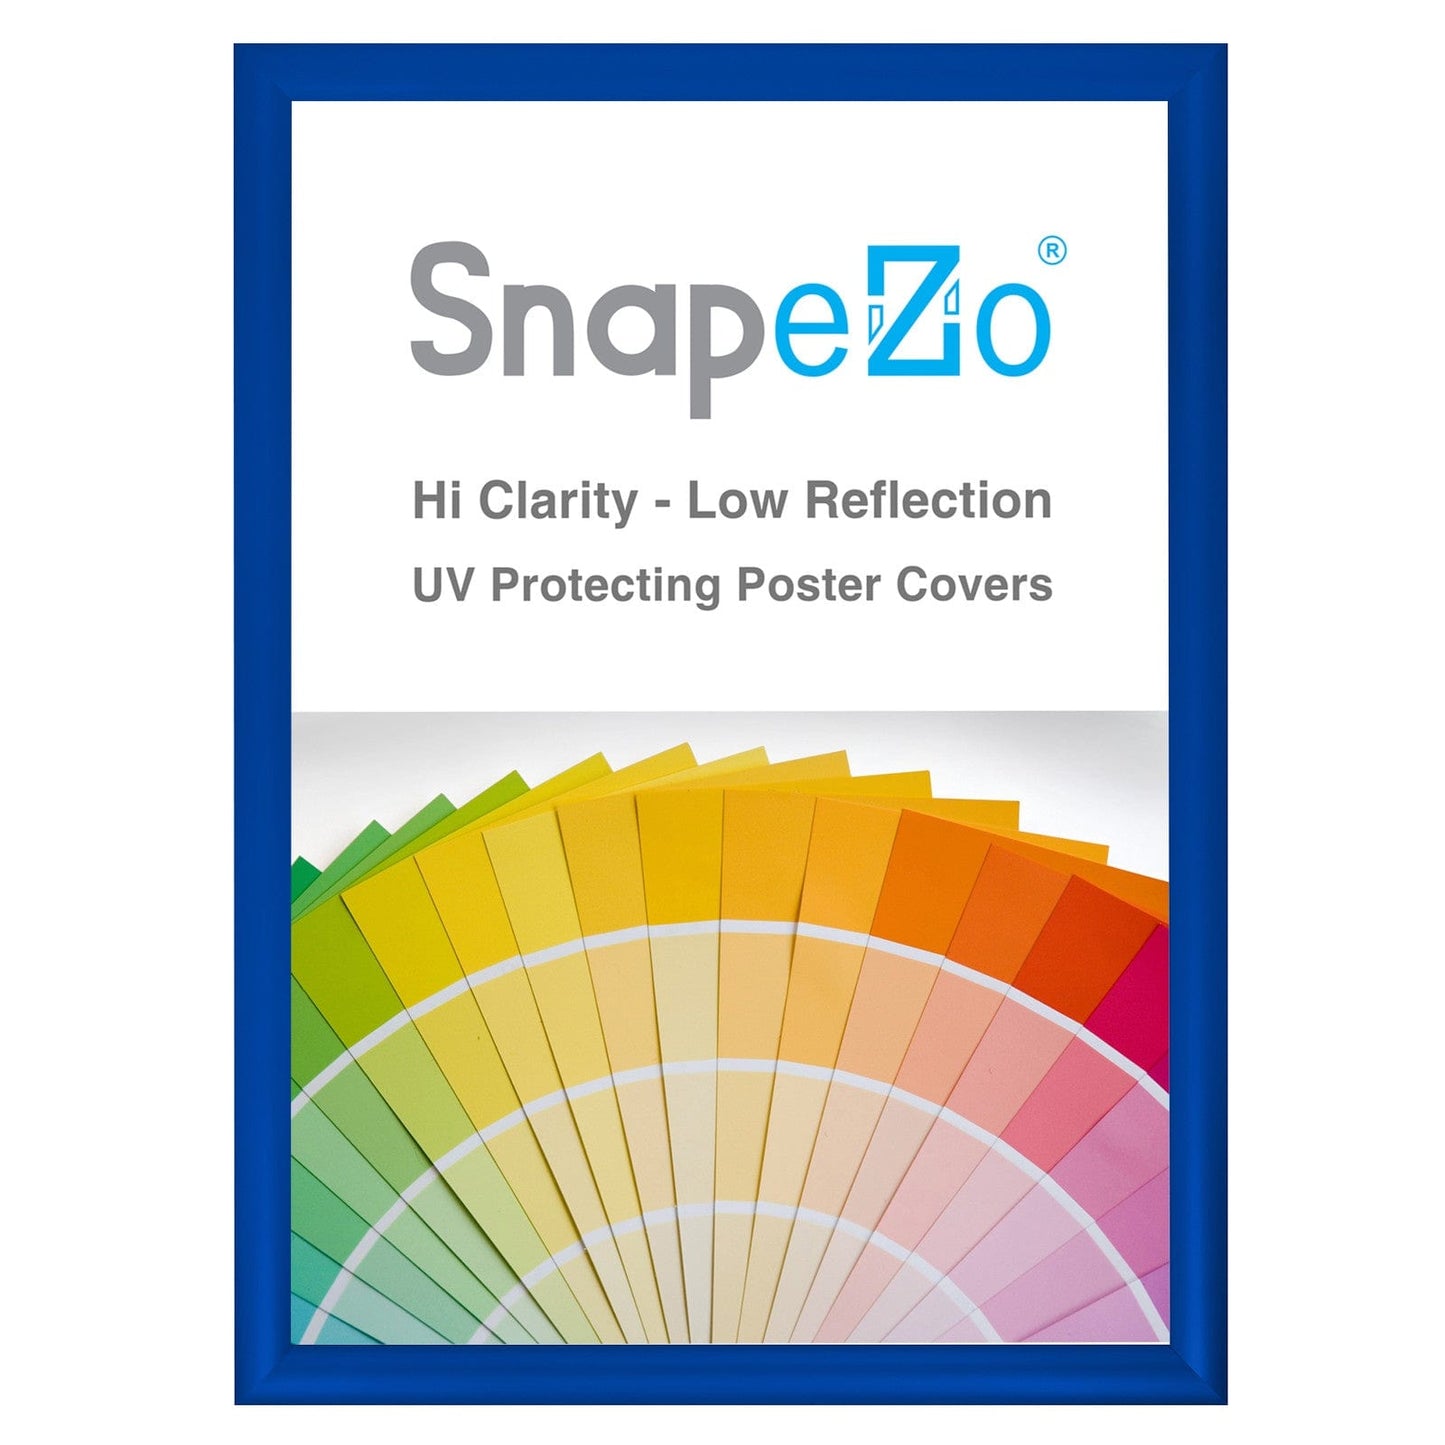 17x23 Blue SnapeZo® Snap Frame - 1.2" Profile - Snap Frames Direct